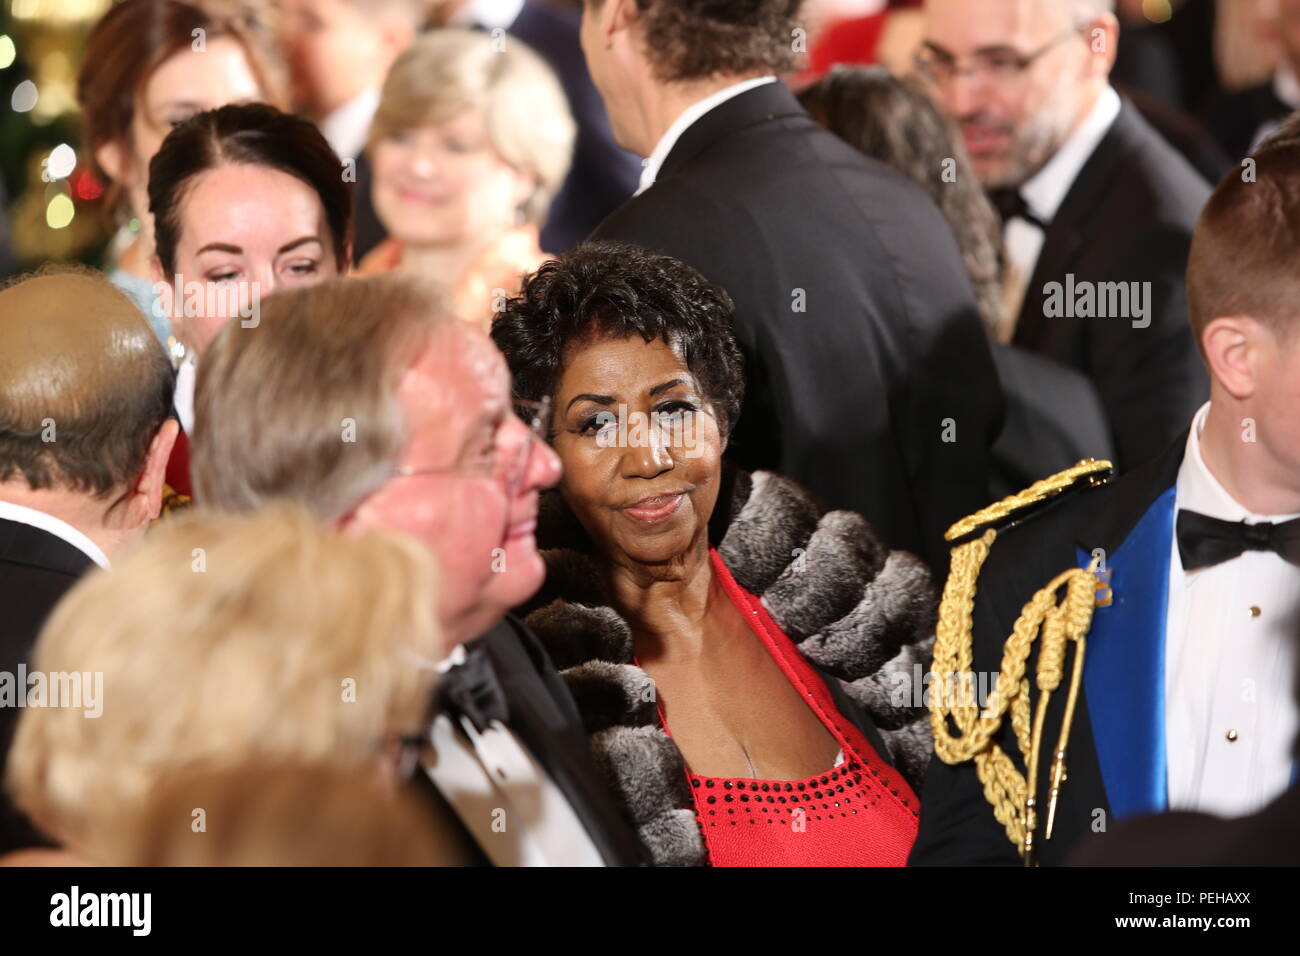 Washington, District of Columbia, USA. 4th Dec, 2016. Singer Aretha Franklin leaves the East Room after attending an event for the 2016 Kennedy Center Honorees, in the East Room of the White House, December 4, 2016. The 2016 honorees are: Argentine pianist Martha Argerich; rock band the Eagles; screen and stage actor Al Pacino; gospel and blues singer Mavis Staples; and musician James Taylor.Credit: Aude Guerrucci/Pool via CNP Credit: Aude Guerrucci/CNP/ZUMA Wire/Alamy Live News Stock Photo